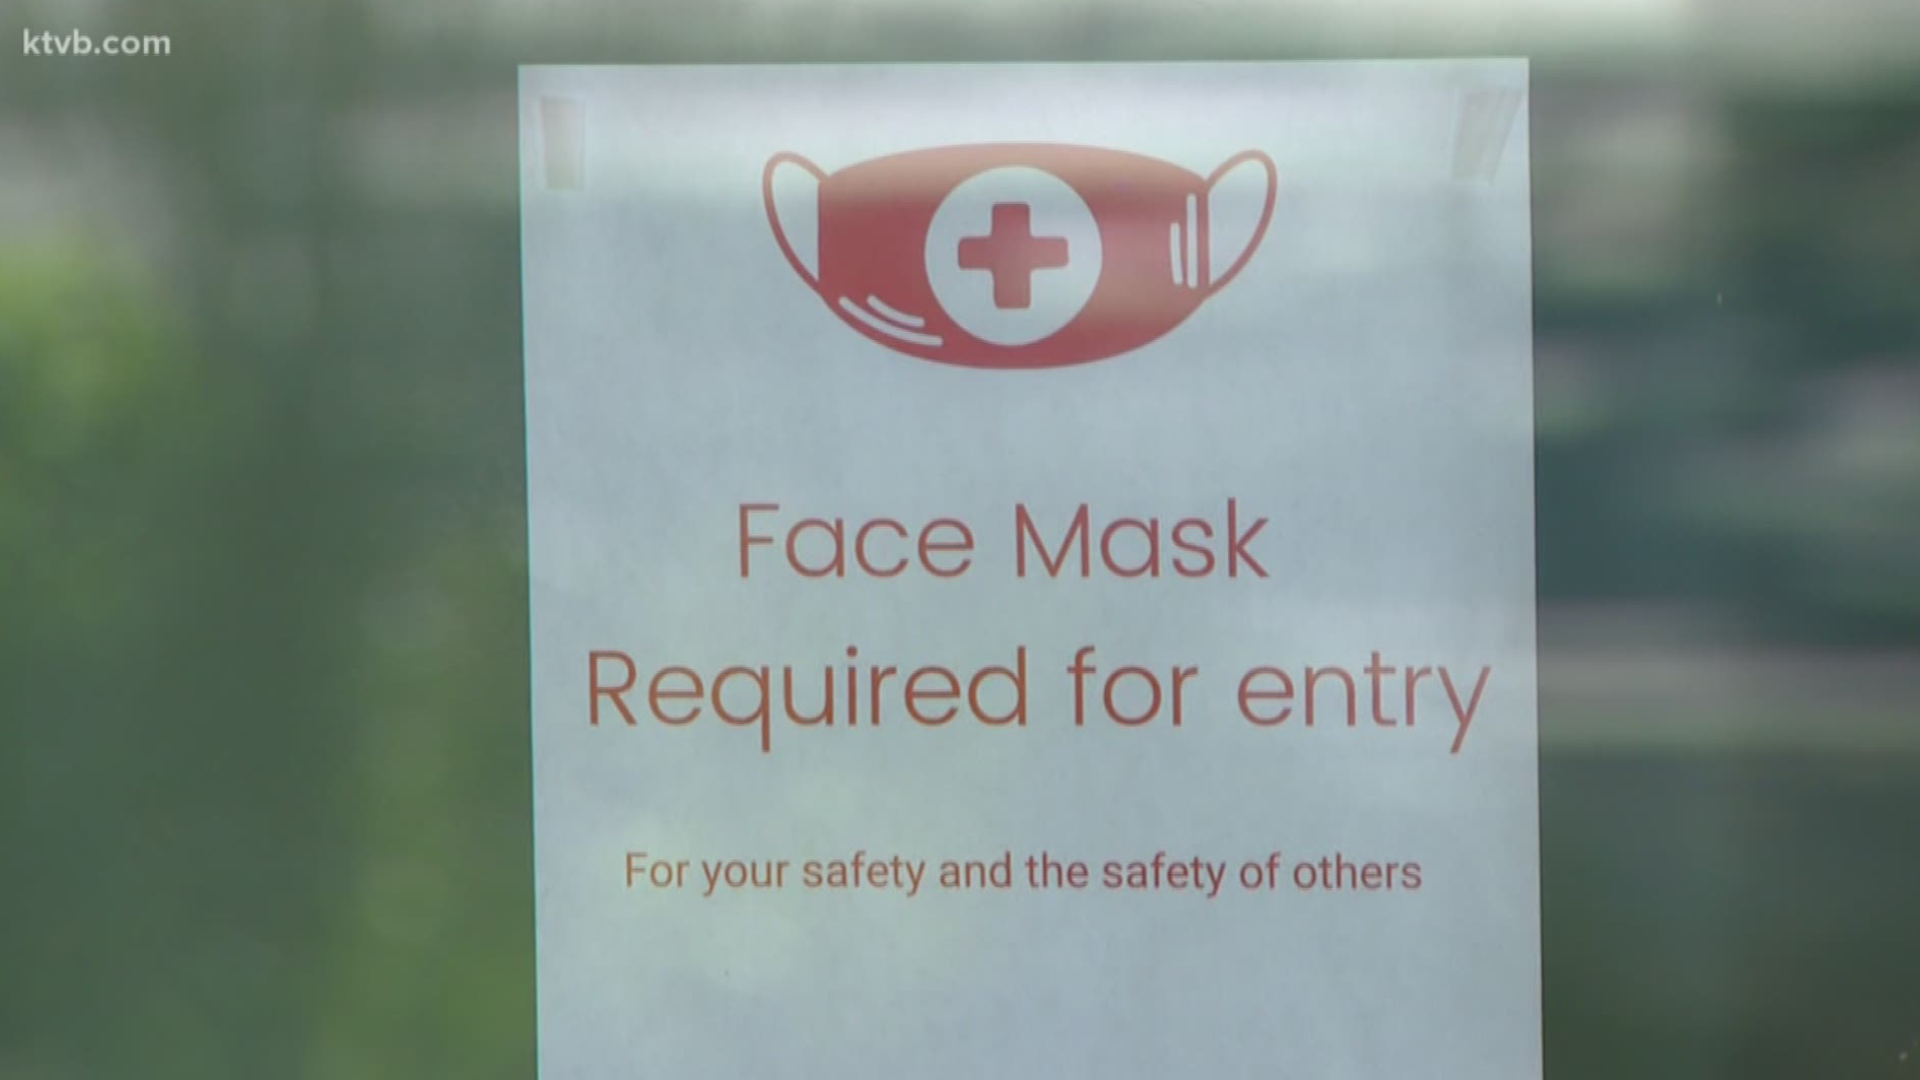 Can Boise businesses refuse service if someone doesn't wear a mask